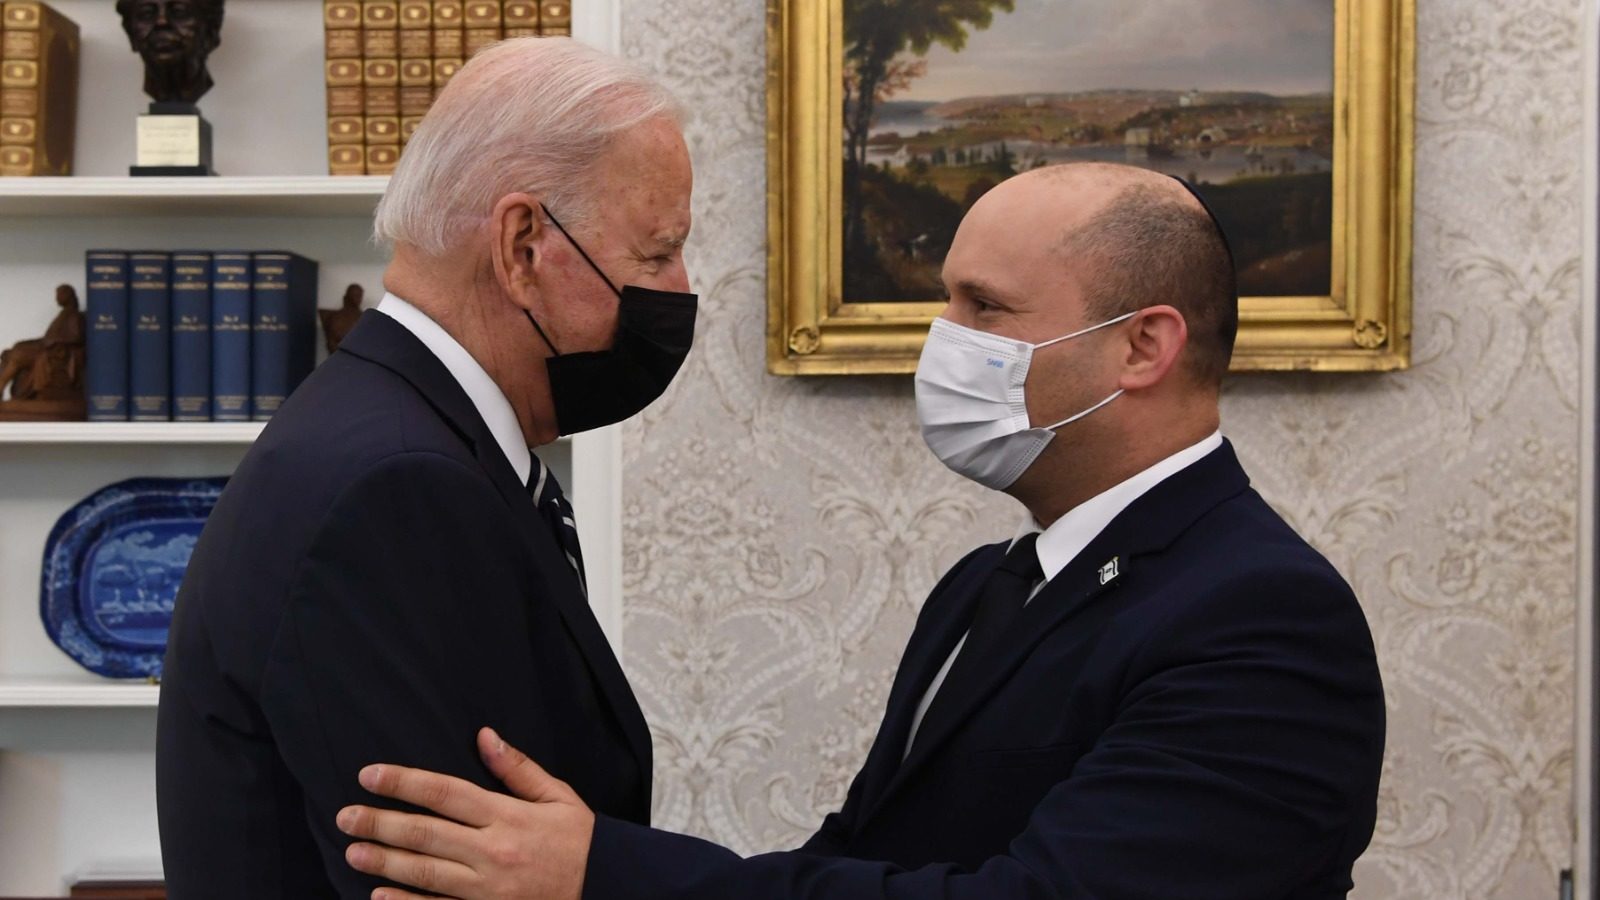 Bennett Meets Biden in Oval Office to Align Positions on Iran, Reset Israel-US Relations